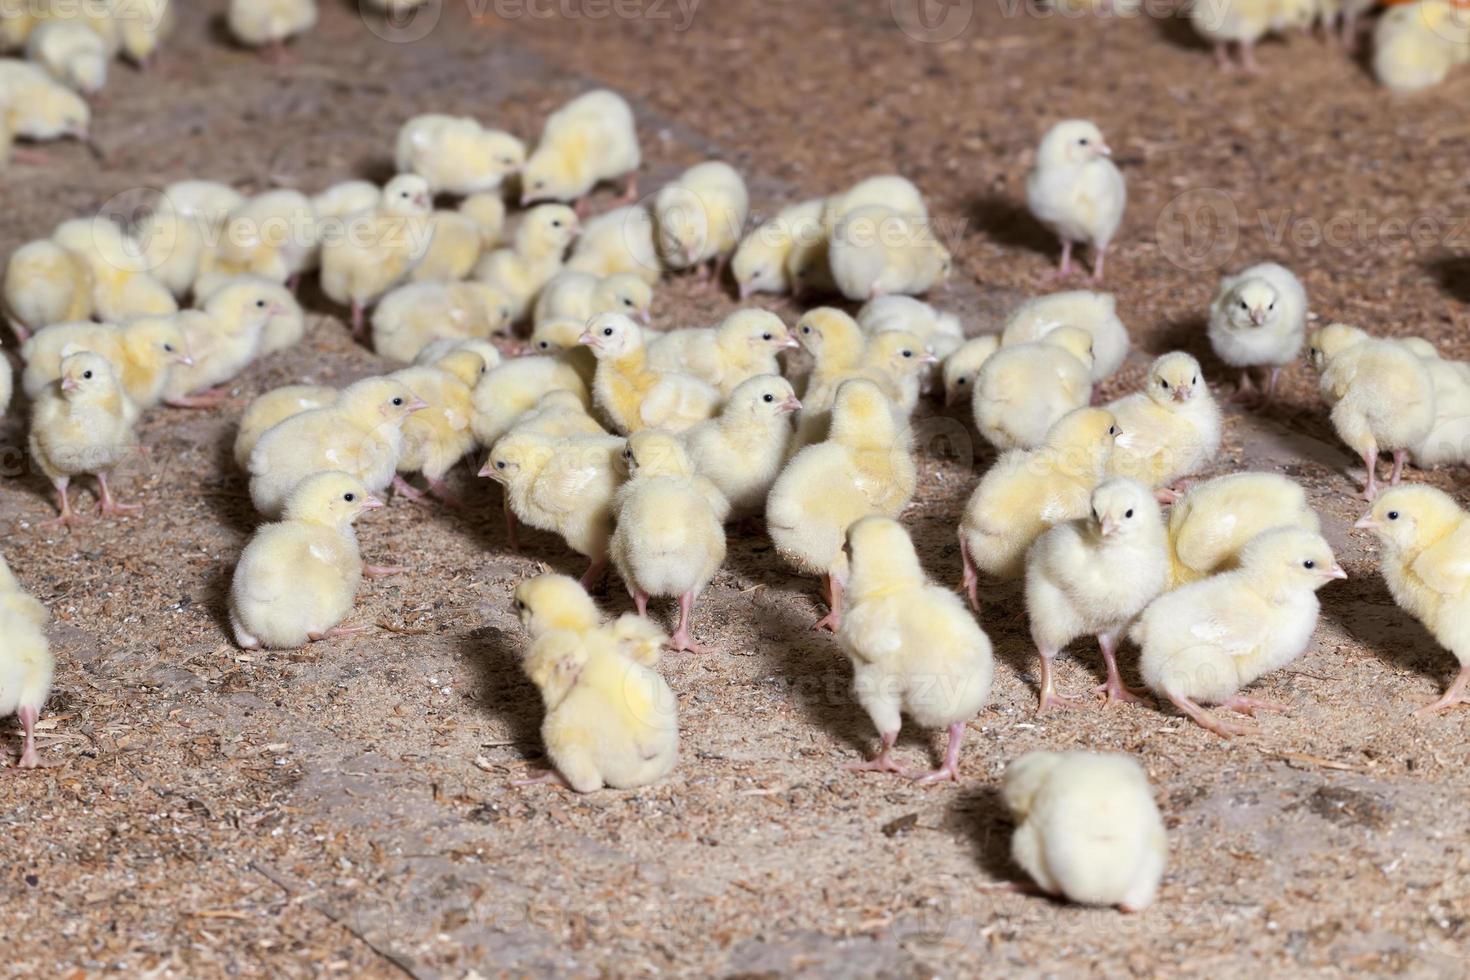 chicken chicks at a poultry farm, close up photo